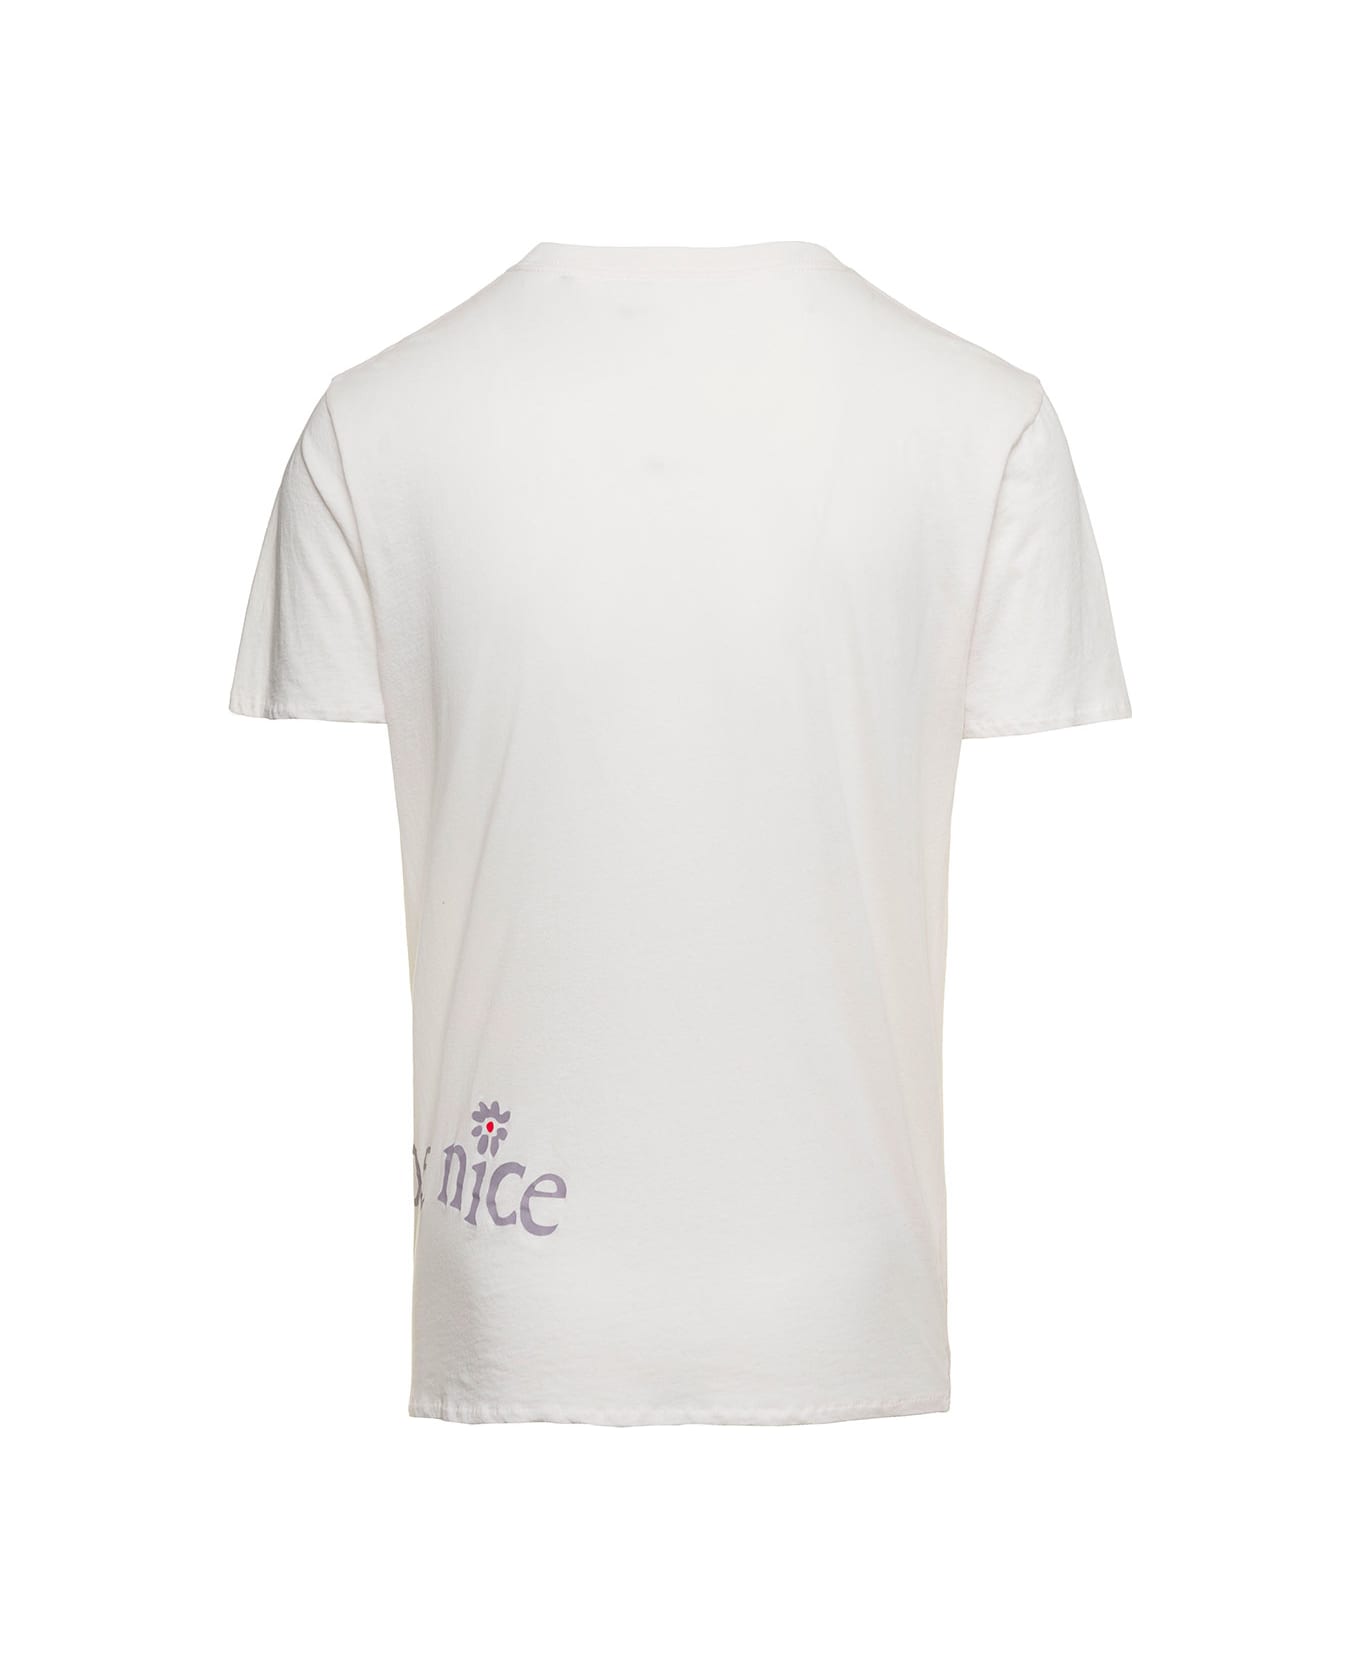 ERL White Crewneck T-shirt With Venice Print In Cotton - White